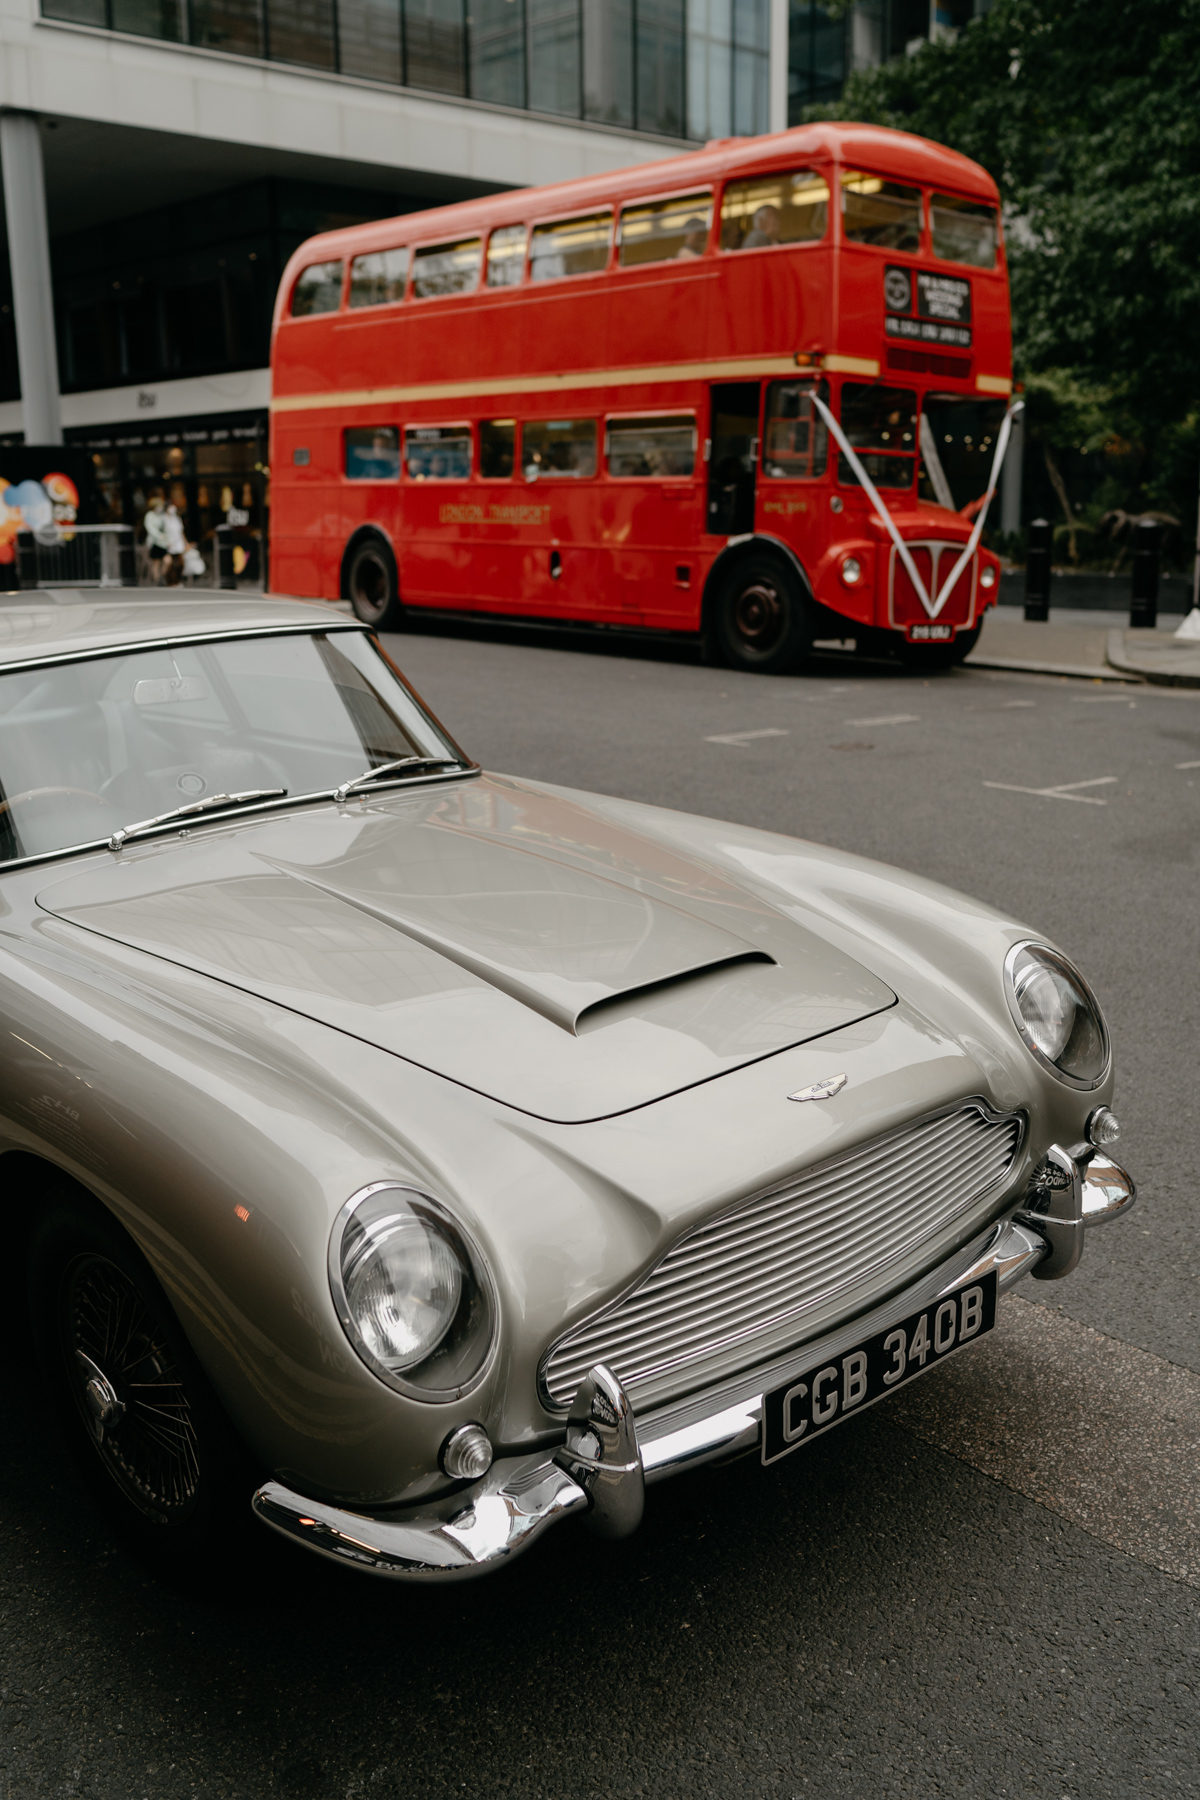 Aston Martin DB5 and red wedding double decker bus